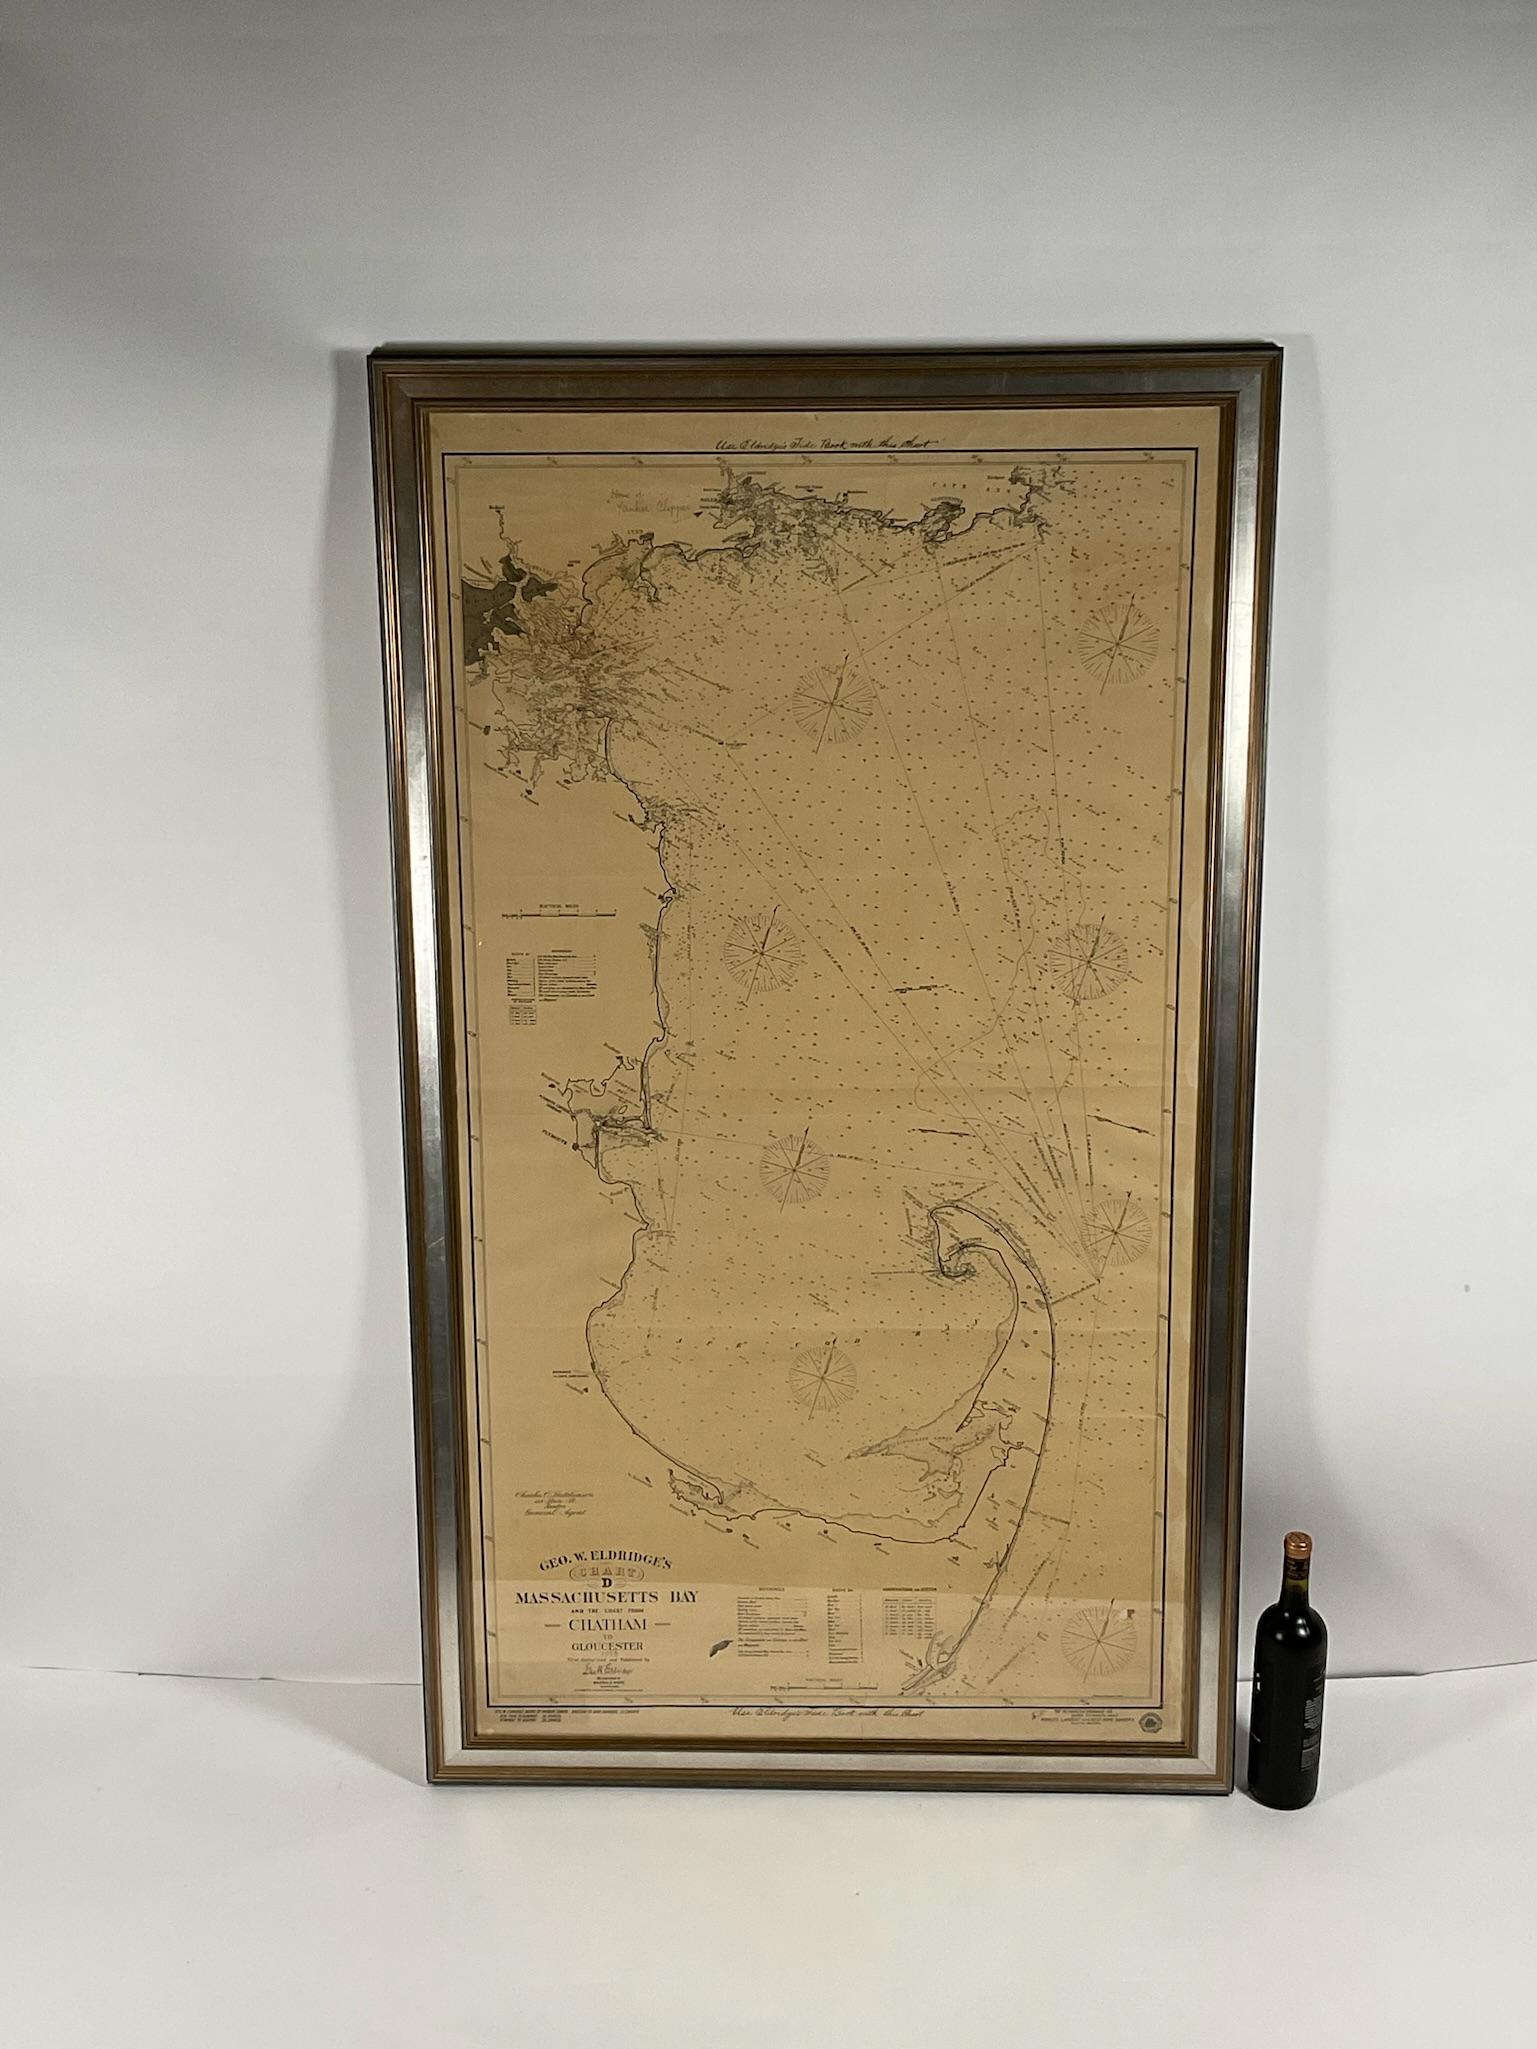 Rare early twentieth century chart of Cape Cod bay by George Eldridge showing Massachusetts Bay, and the coast from Chatham to Gloucester 1918. Signed George Eldridge.

This great chart shows Chatham, Provincetown, Truro, Eastham, Wellfleet, Rock